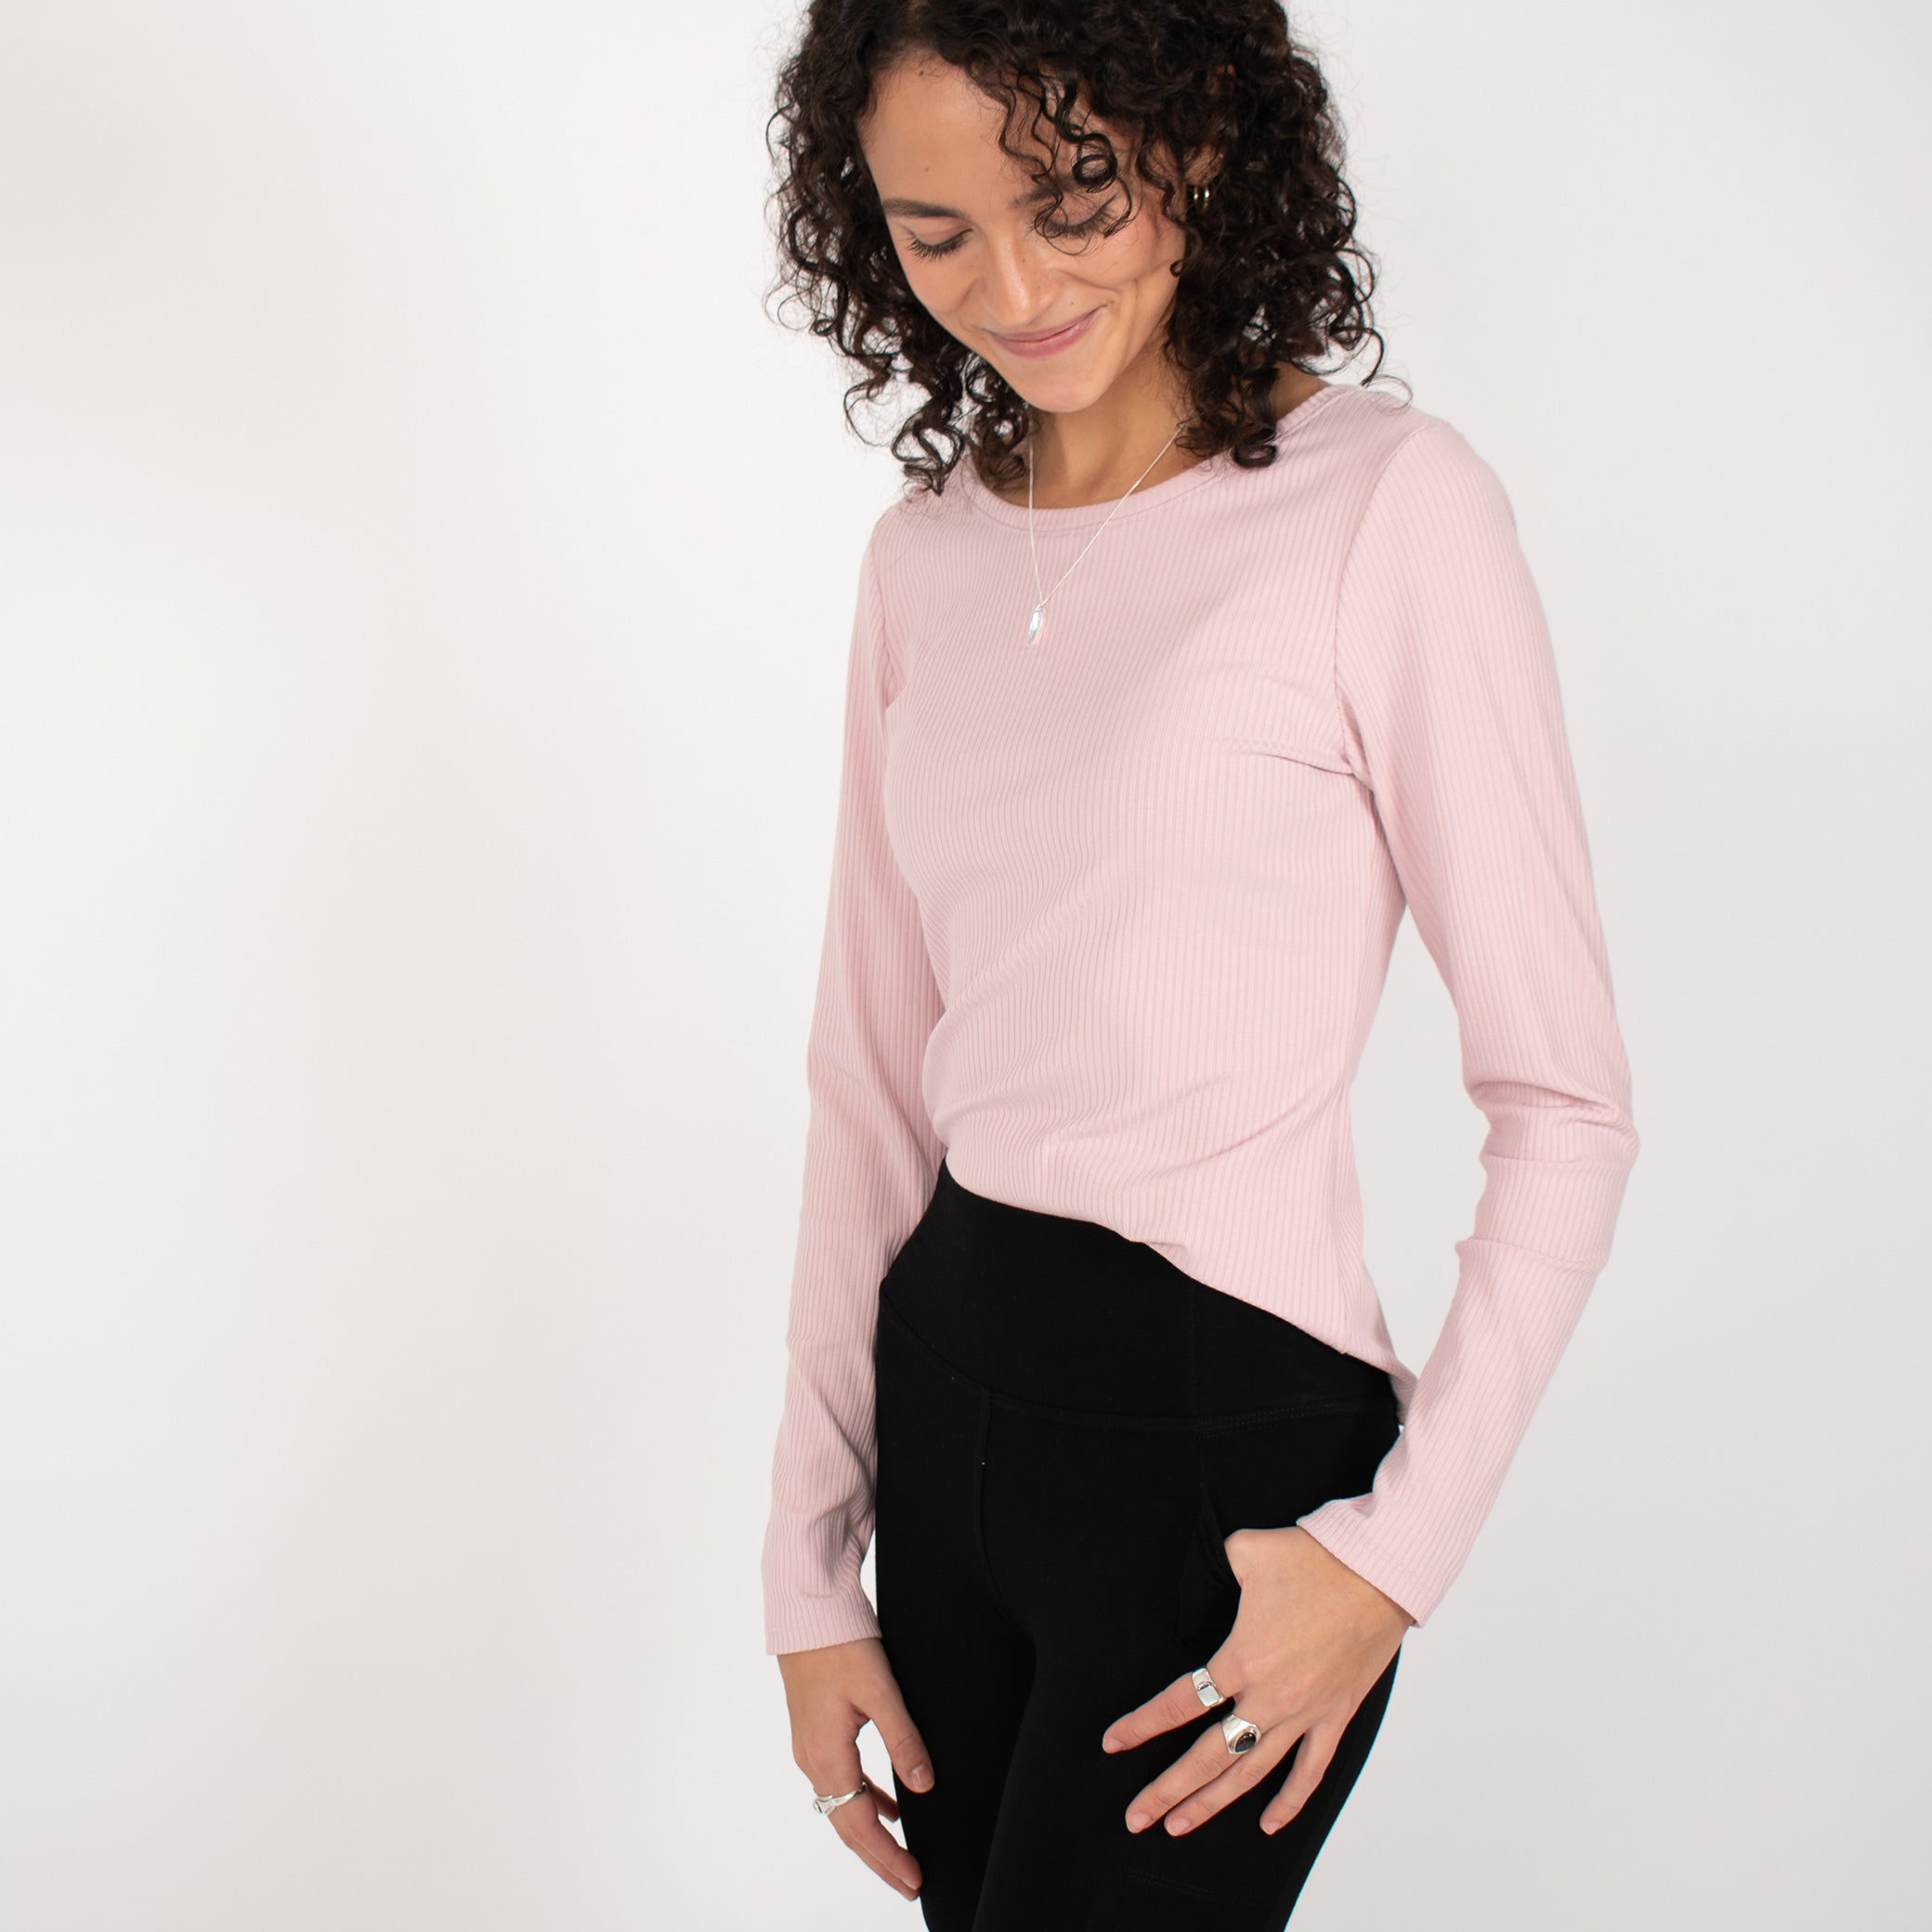 Woman wearing light pink rib knit reversible long sleeve top with black tapered leggings